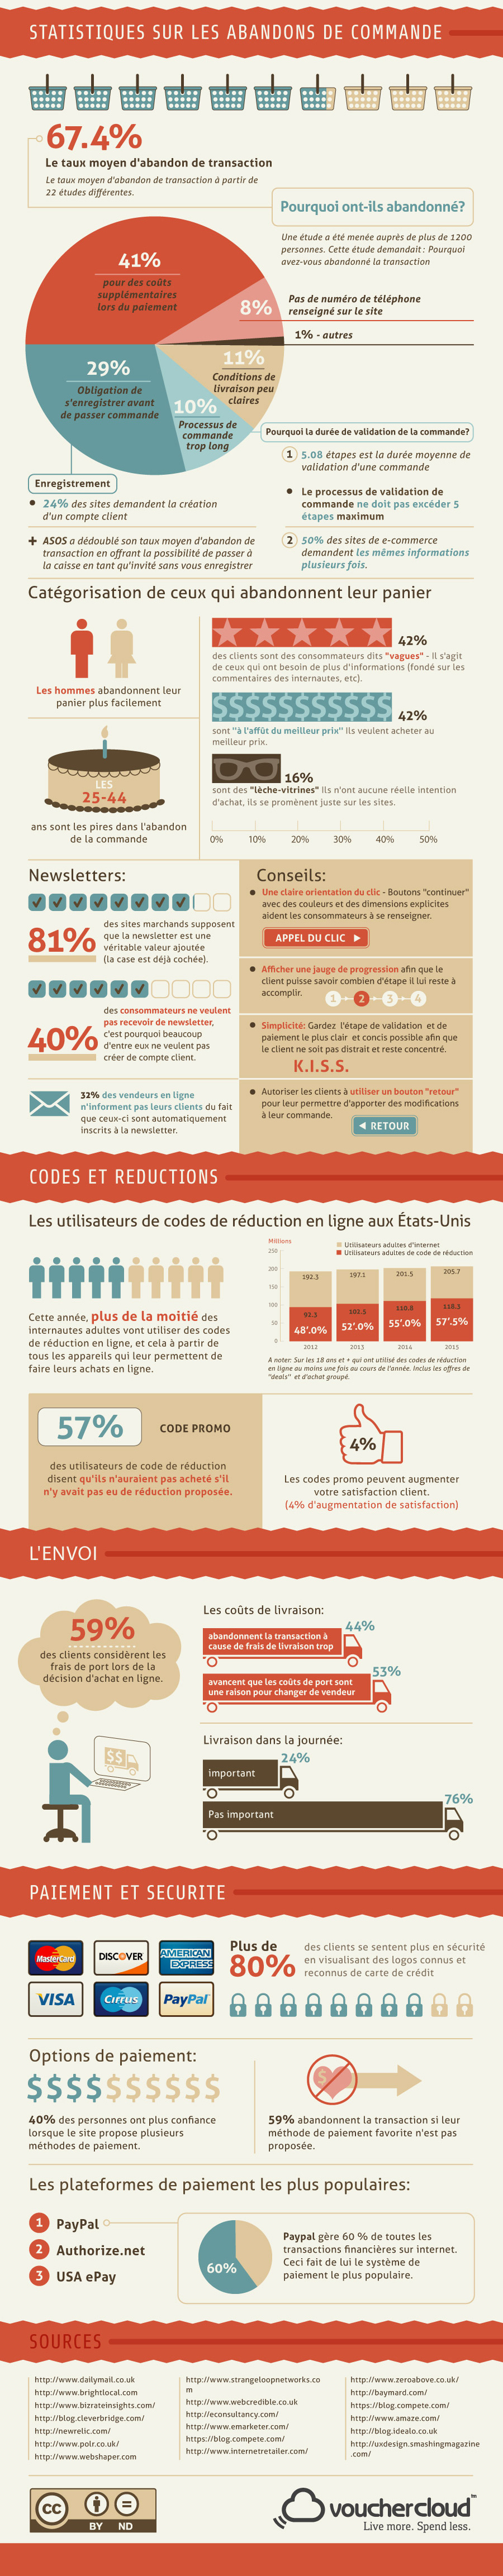 infographie-psychologie-conso